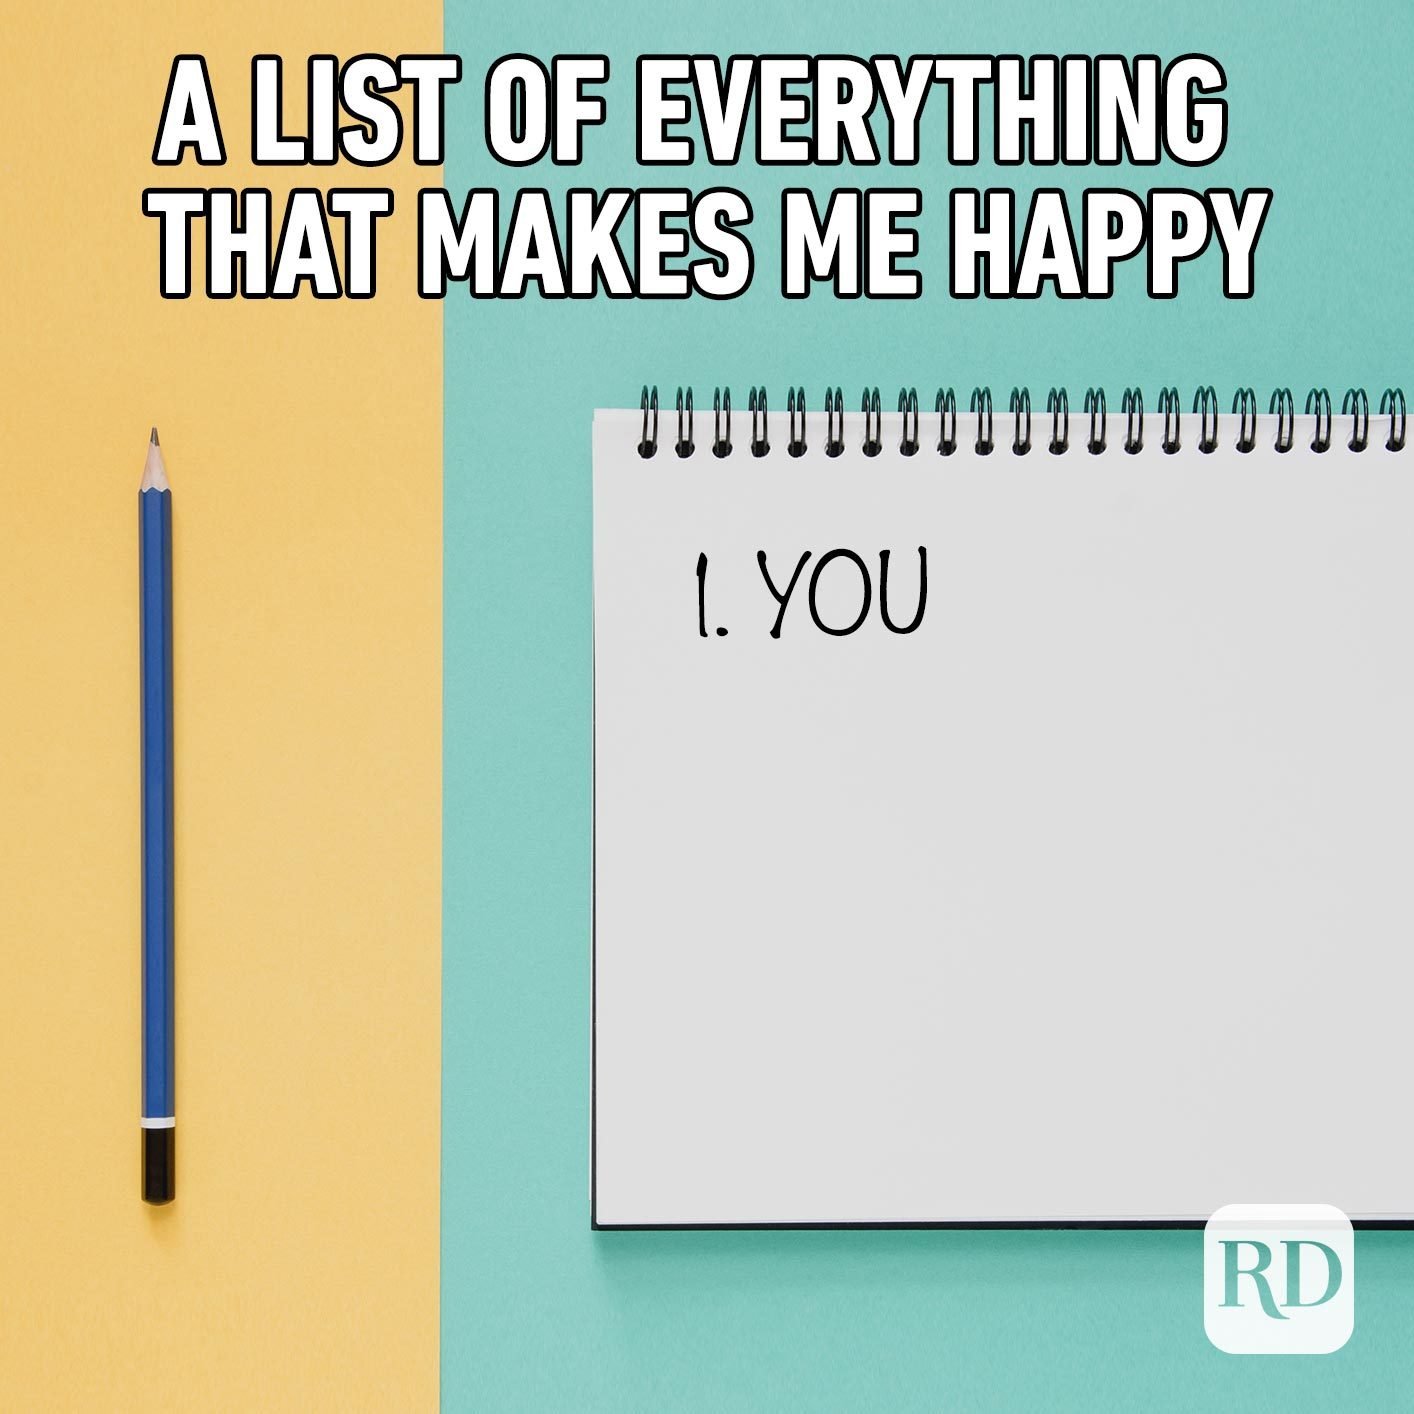 Meme text: A list of everything that makes me happy: You